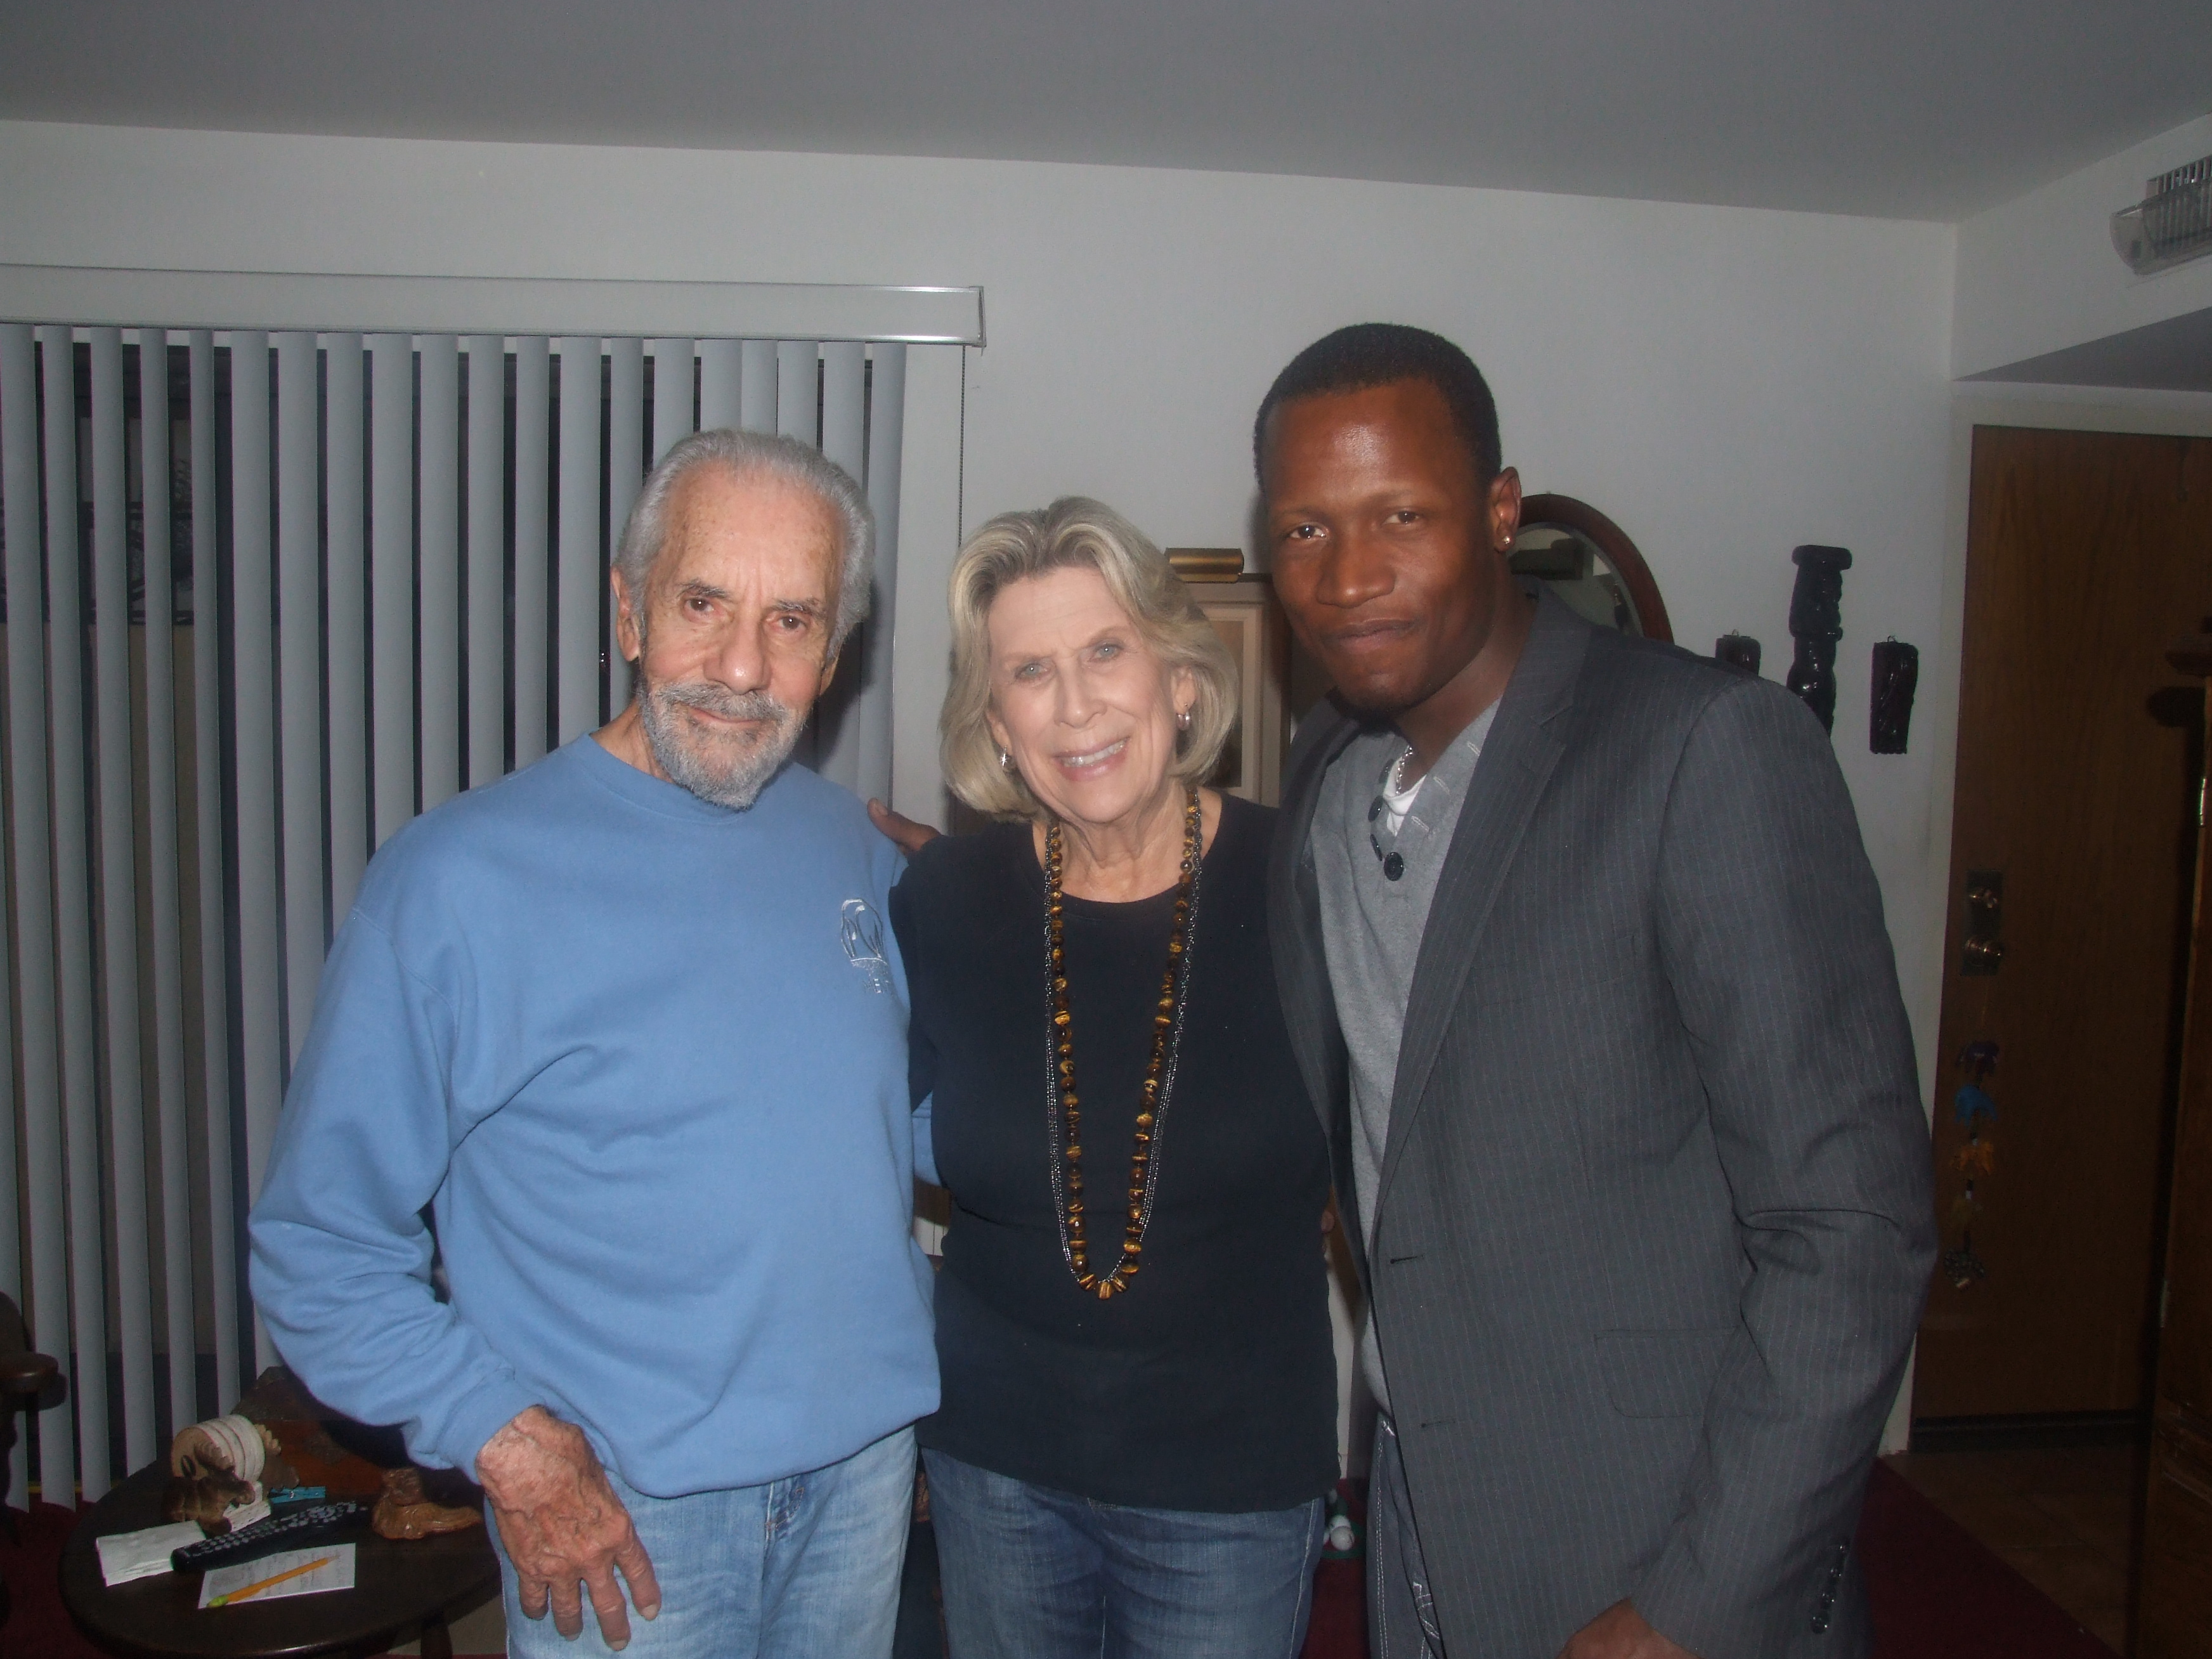 Myself Courtney Winston and Mr Joel Freeman producer of Shaft (Motion picture 1971)and his wife while we was shooting in LA 2010 for a feature film.